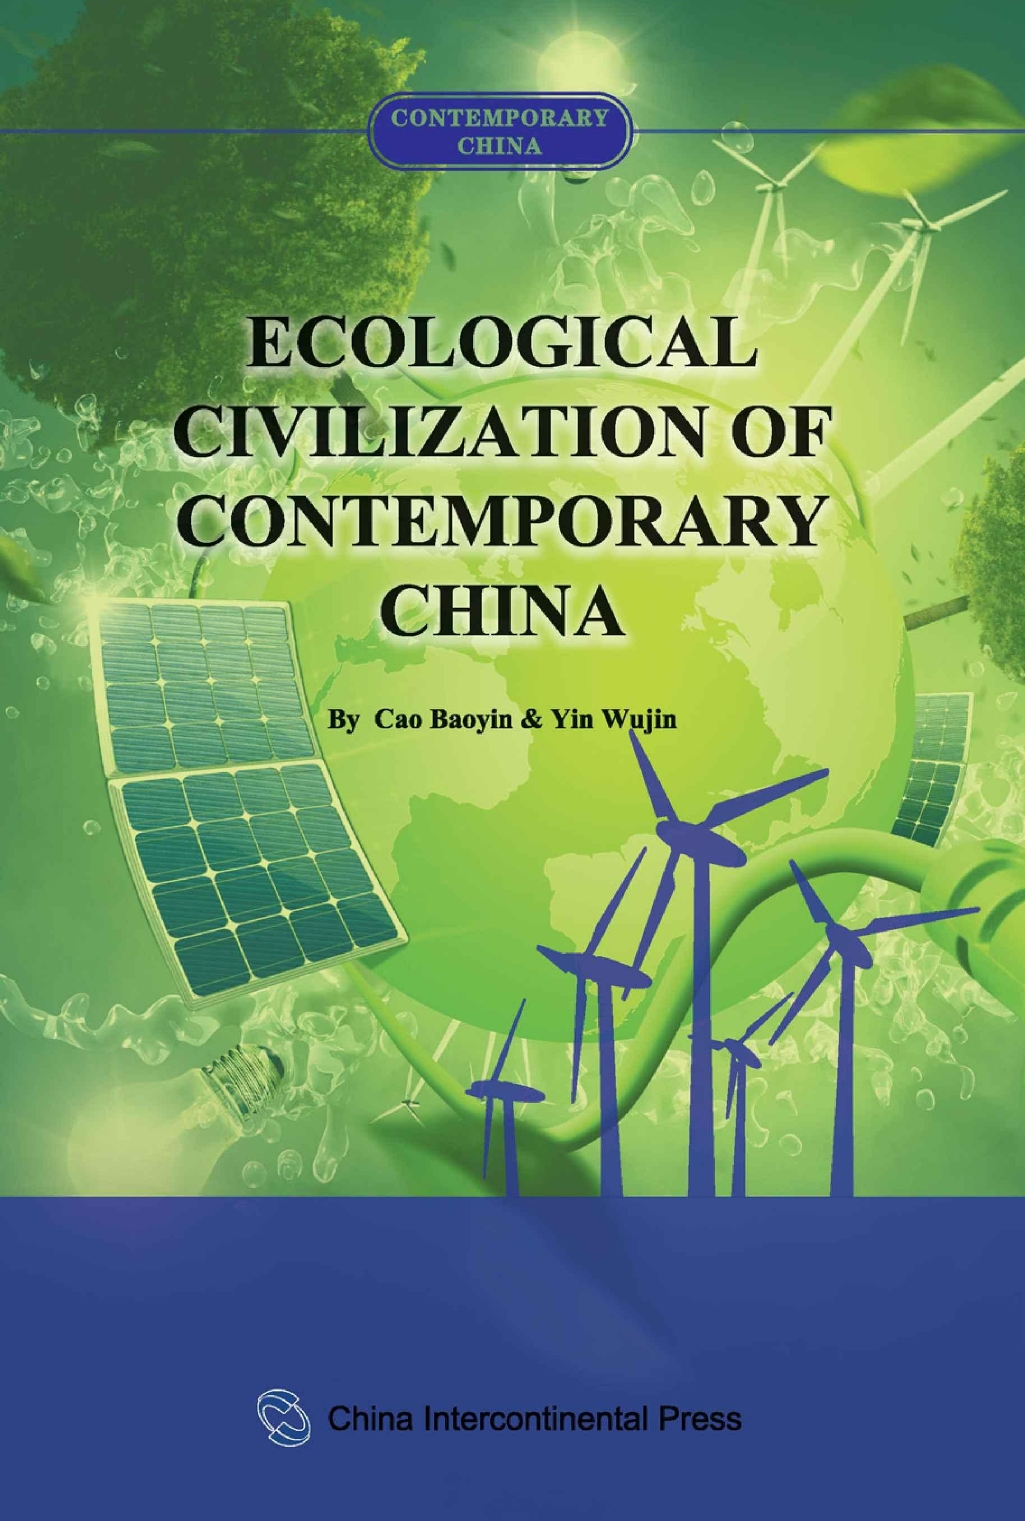 Ecological Civilization of Contemporary China